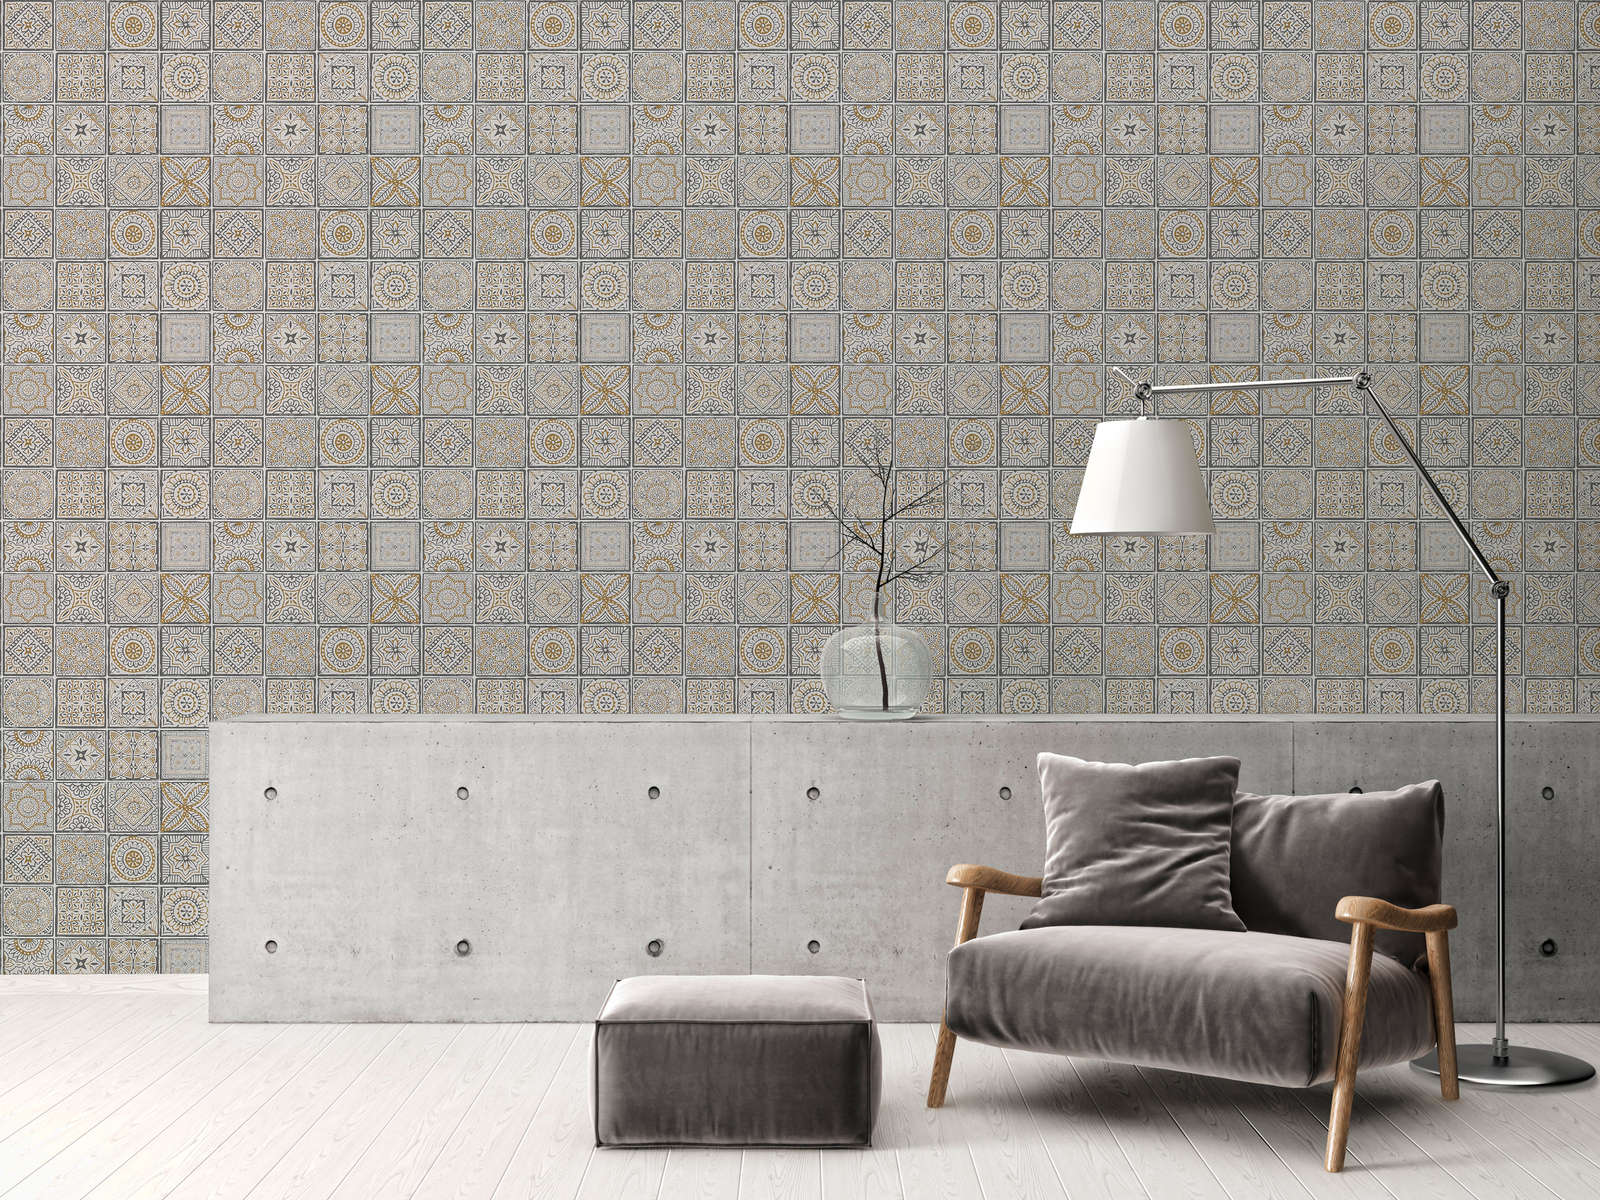             Floral non-woven wallpaper with tiles and mosaic look - gold, white, black
        